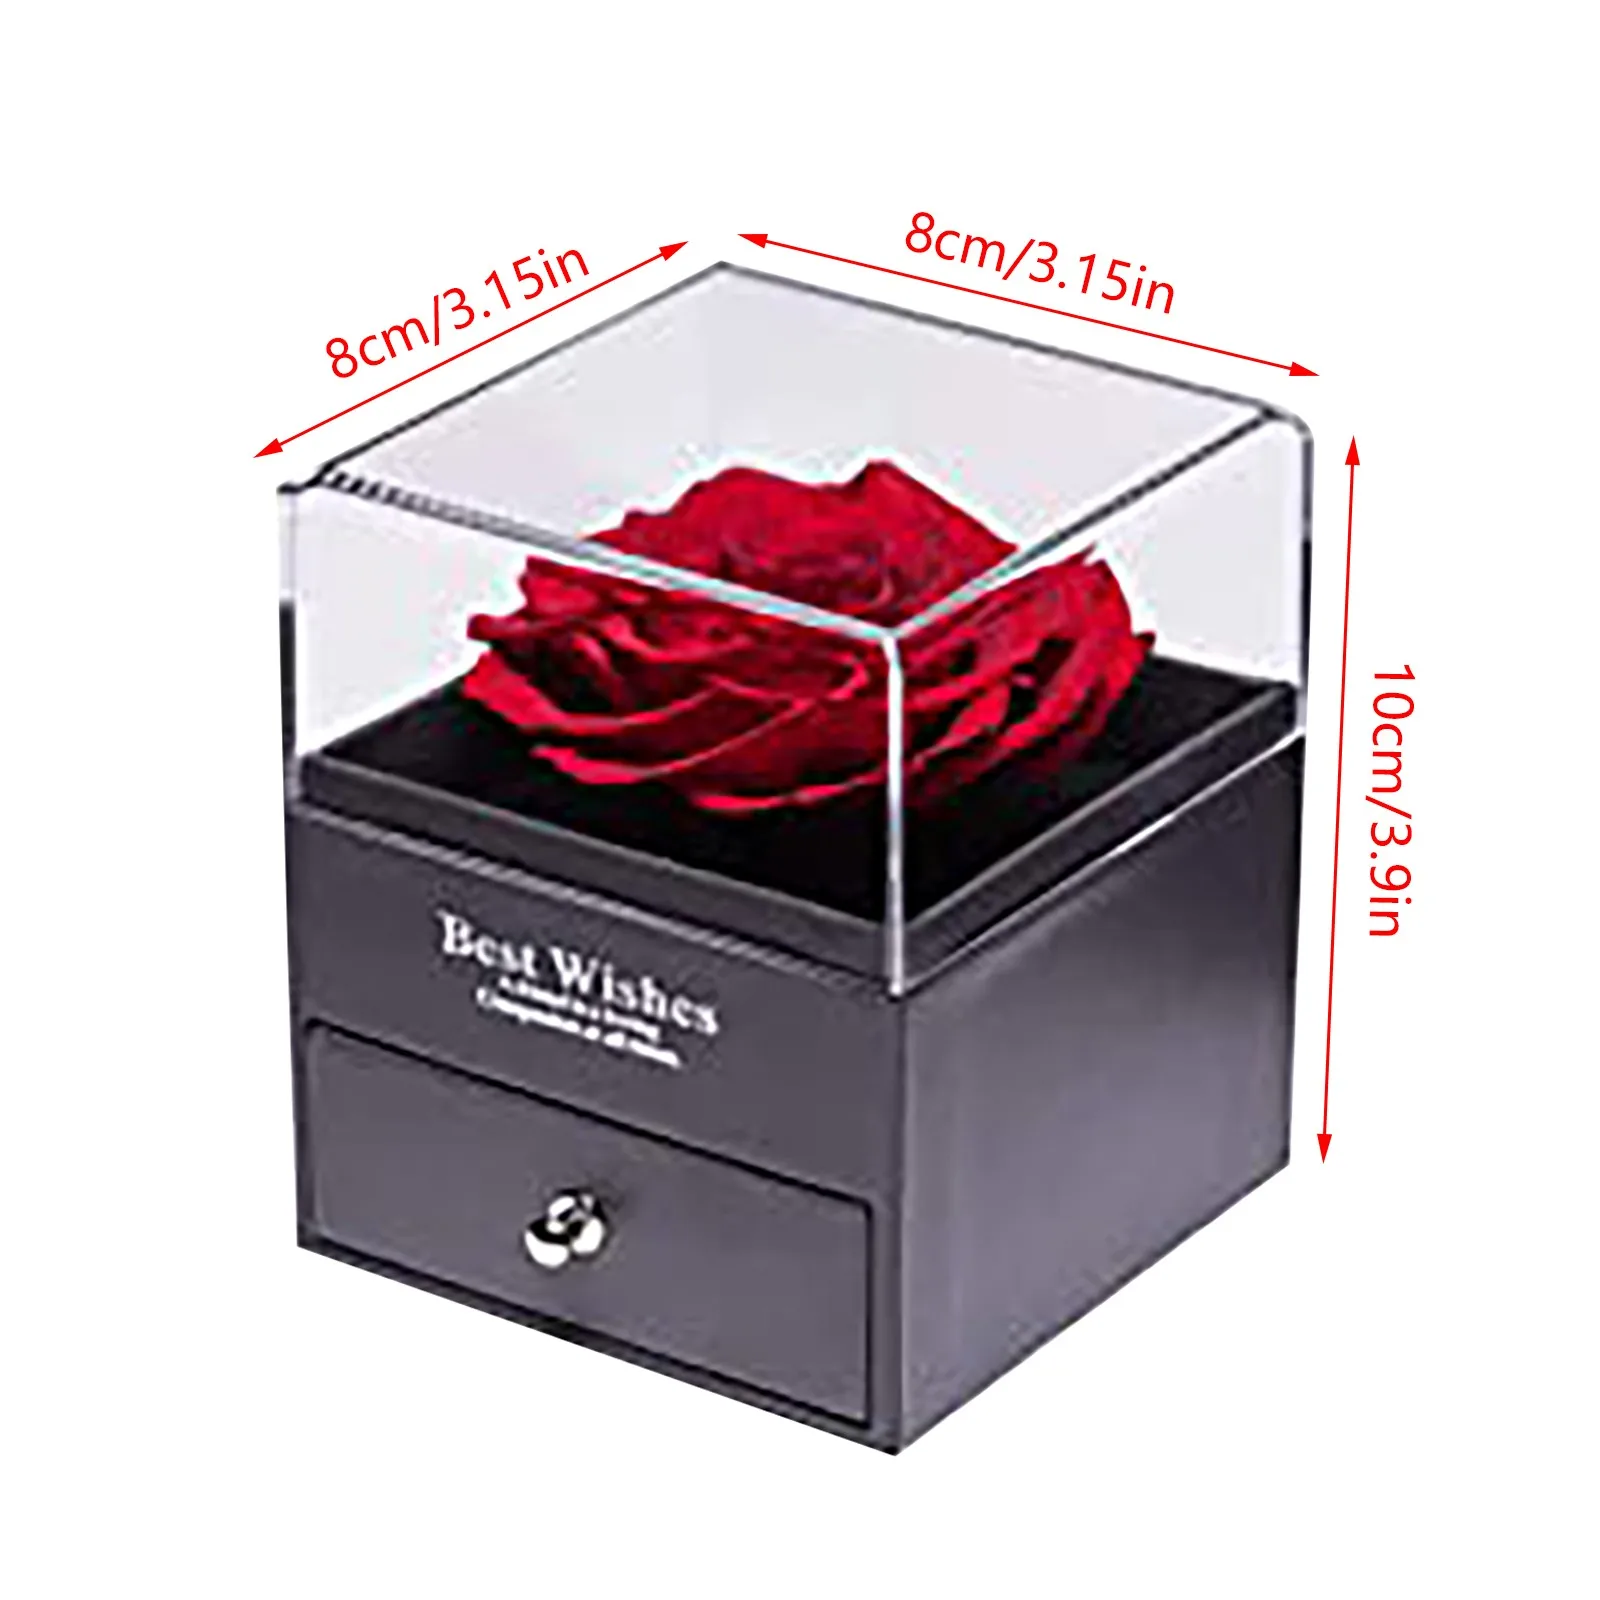 S0f9f4d296c3145ae8826250cc87f1a3eV Everlasting Flower Gift Box Rose Preservation Box Mother's Day Handmade Rose Gif